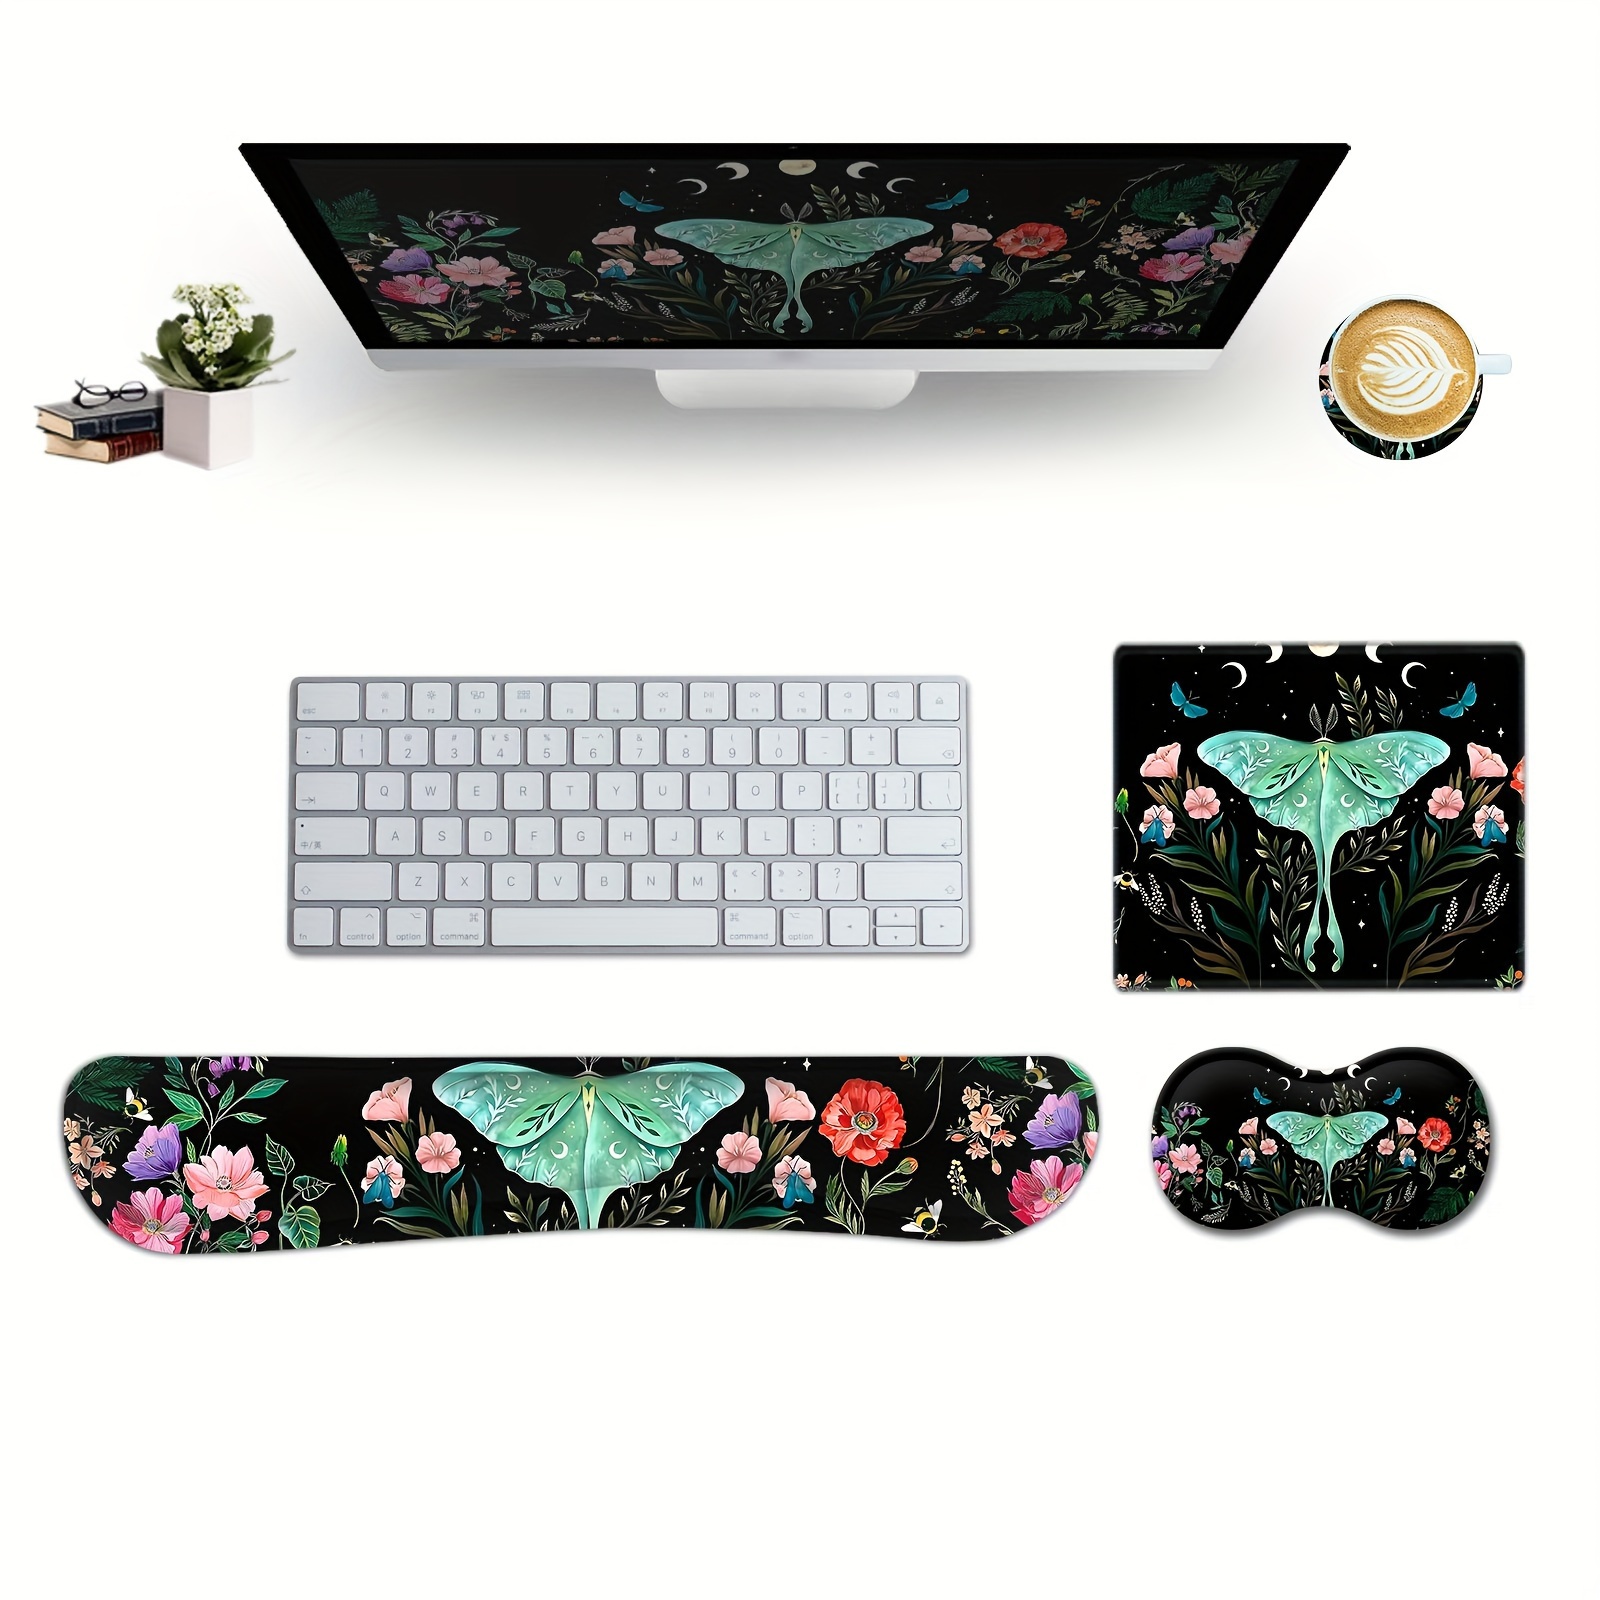 Aelfox Leather-Gel Keyboard Wrist Rest Pad and Mouse Pad Wrist Rest Set,  Ergonomic Wrist Support Wrist Pad Relieve Wrist Pain for Full Size Gaming